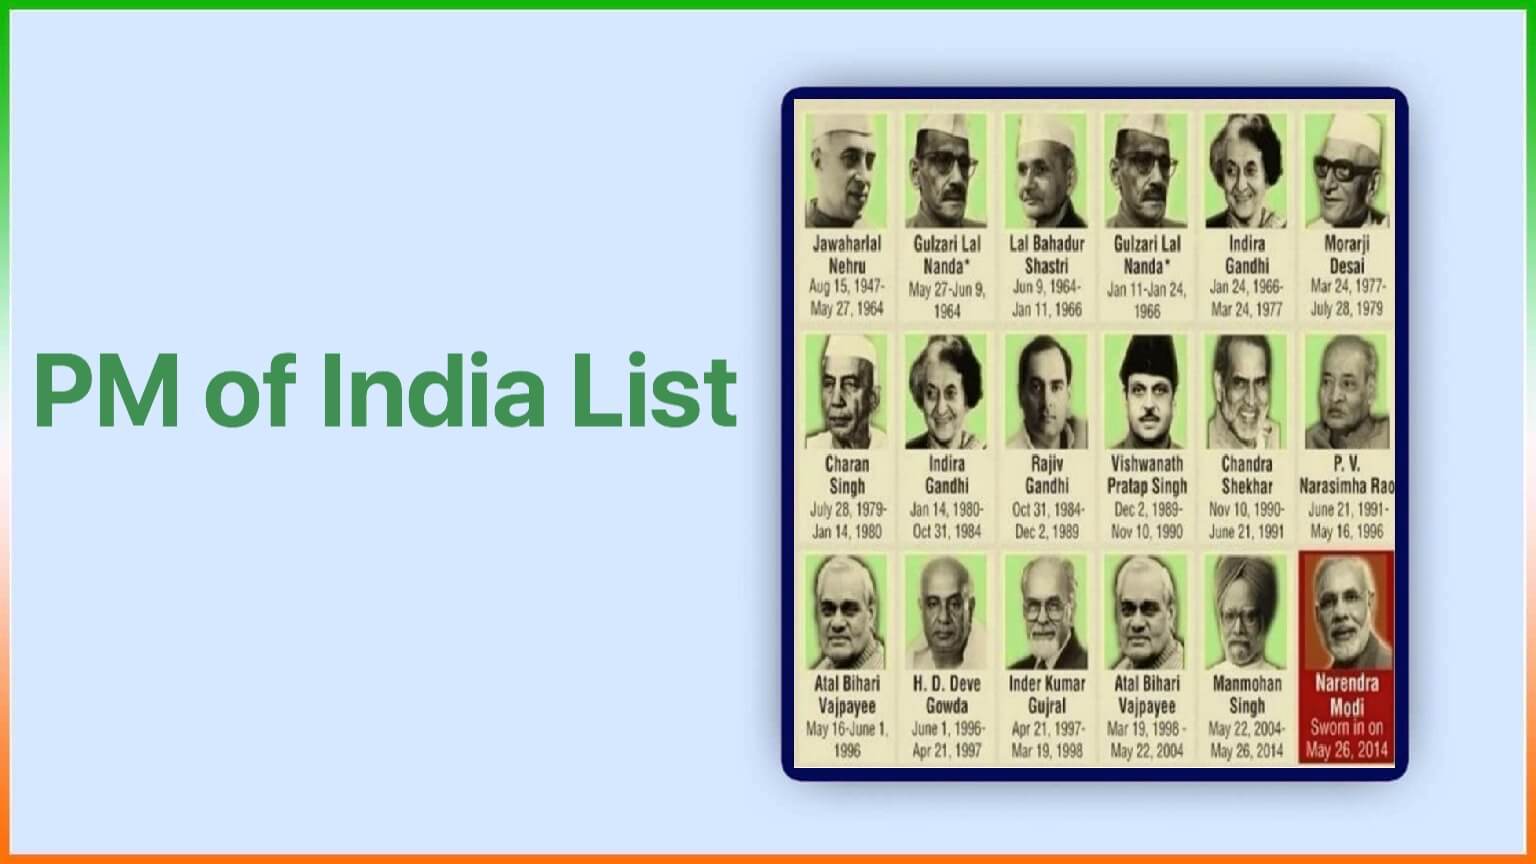 Prime Minister Of India List